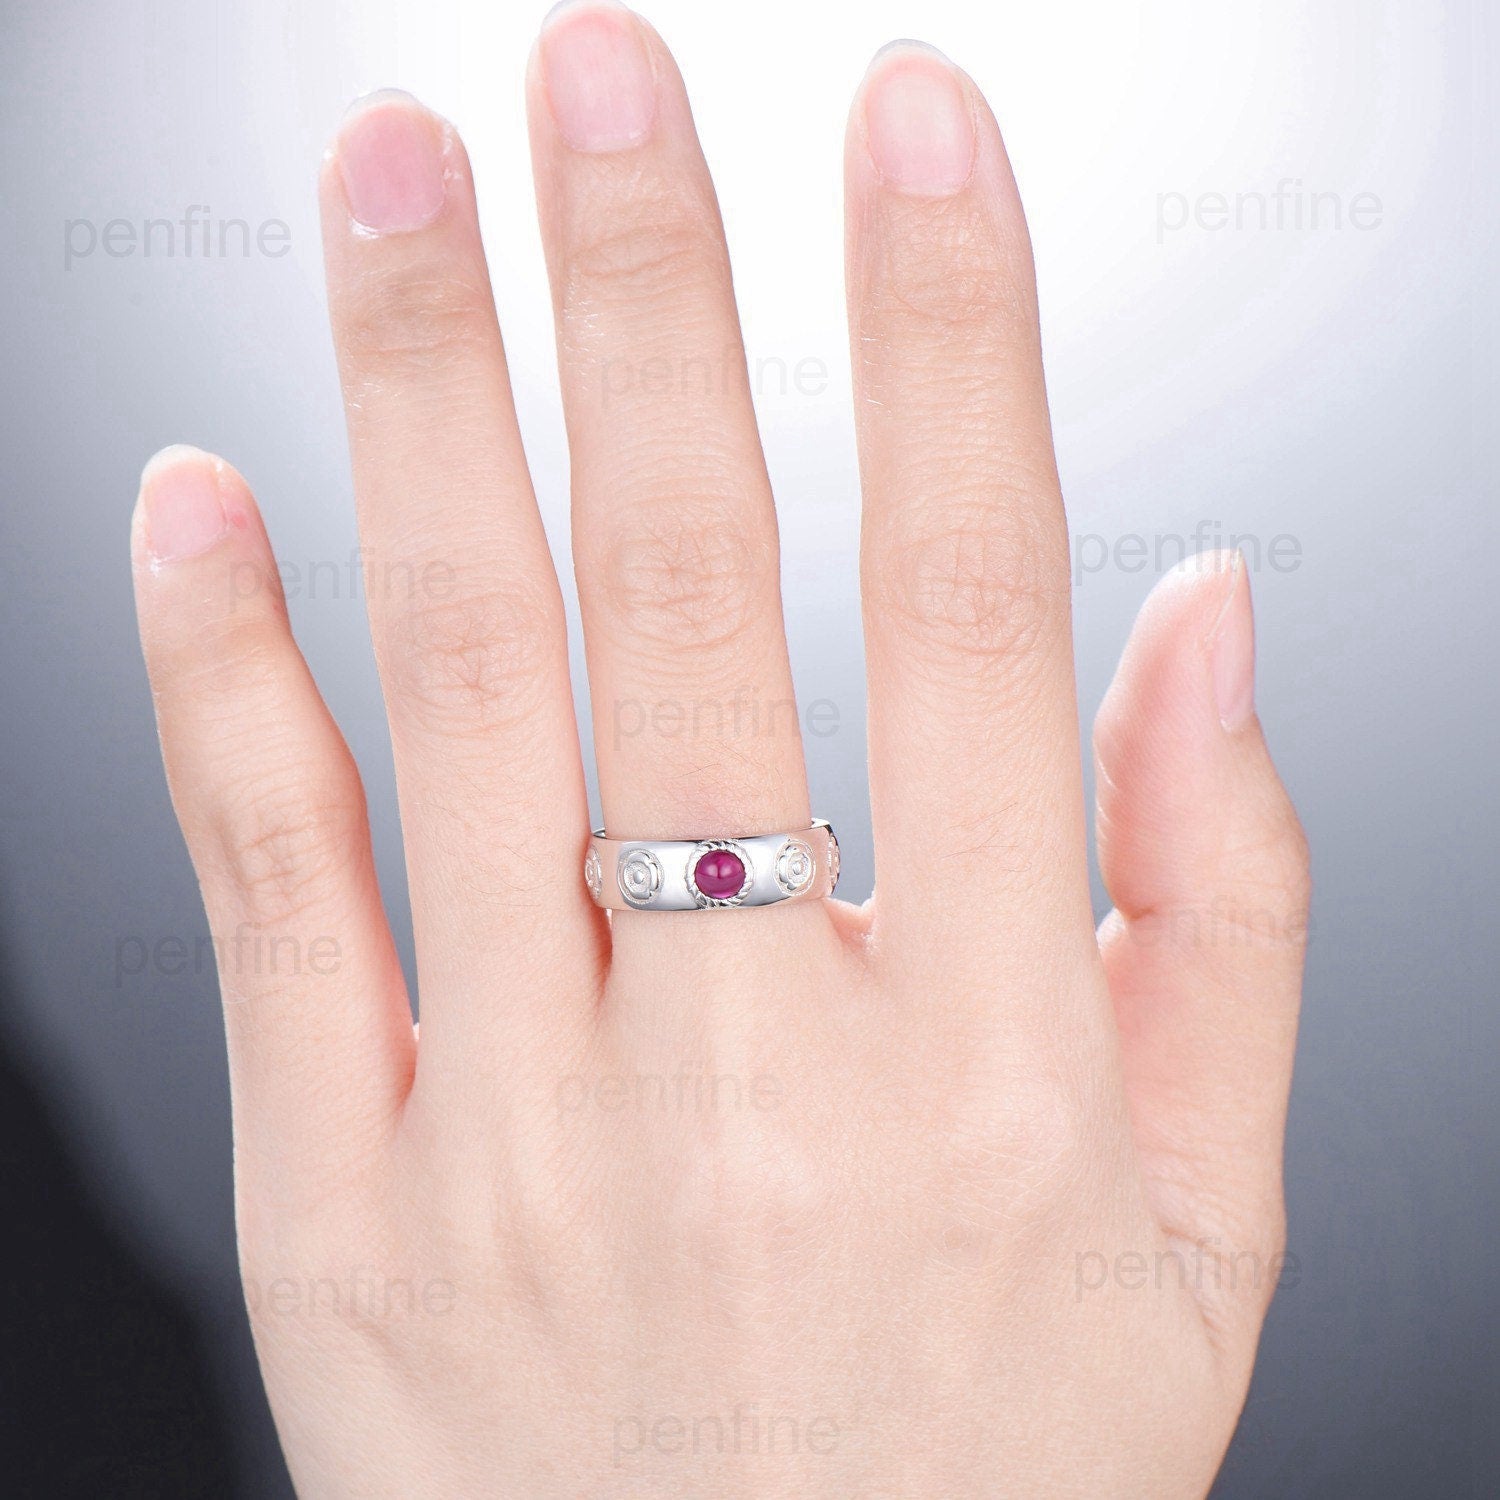 Howls Moving Castle Men's Ring 4mm Round Natural Ruby Wedding Band Silver White Gold Howl's Ring Sophie's Ring Stacking Matching Band Gift - PENFINE